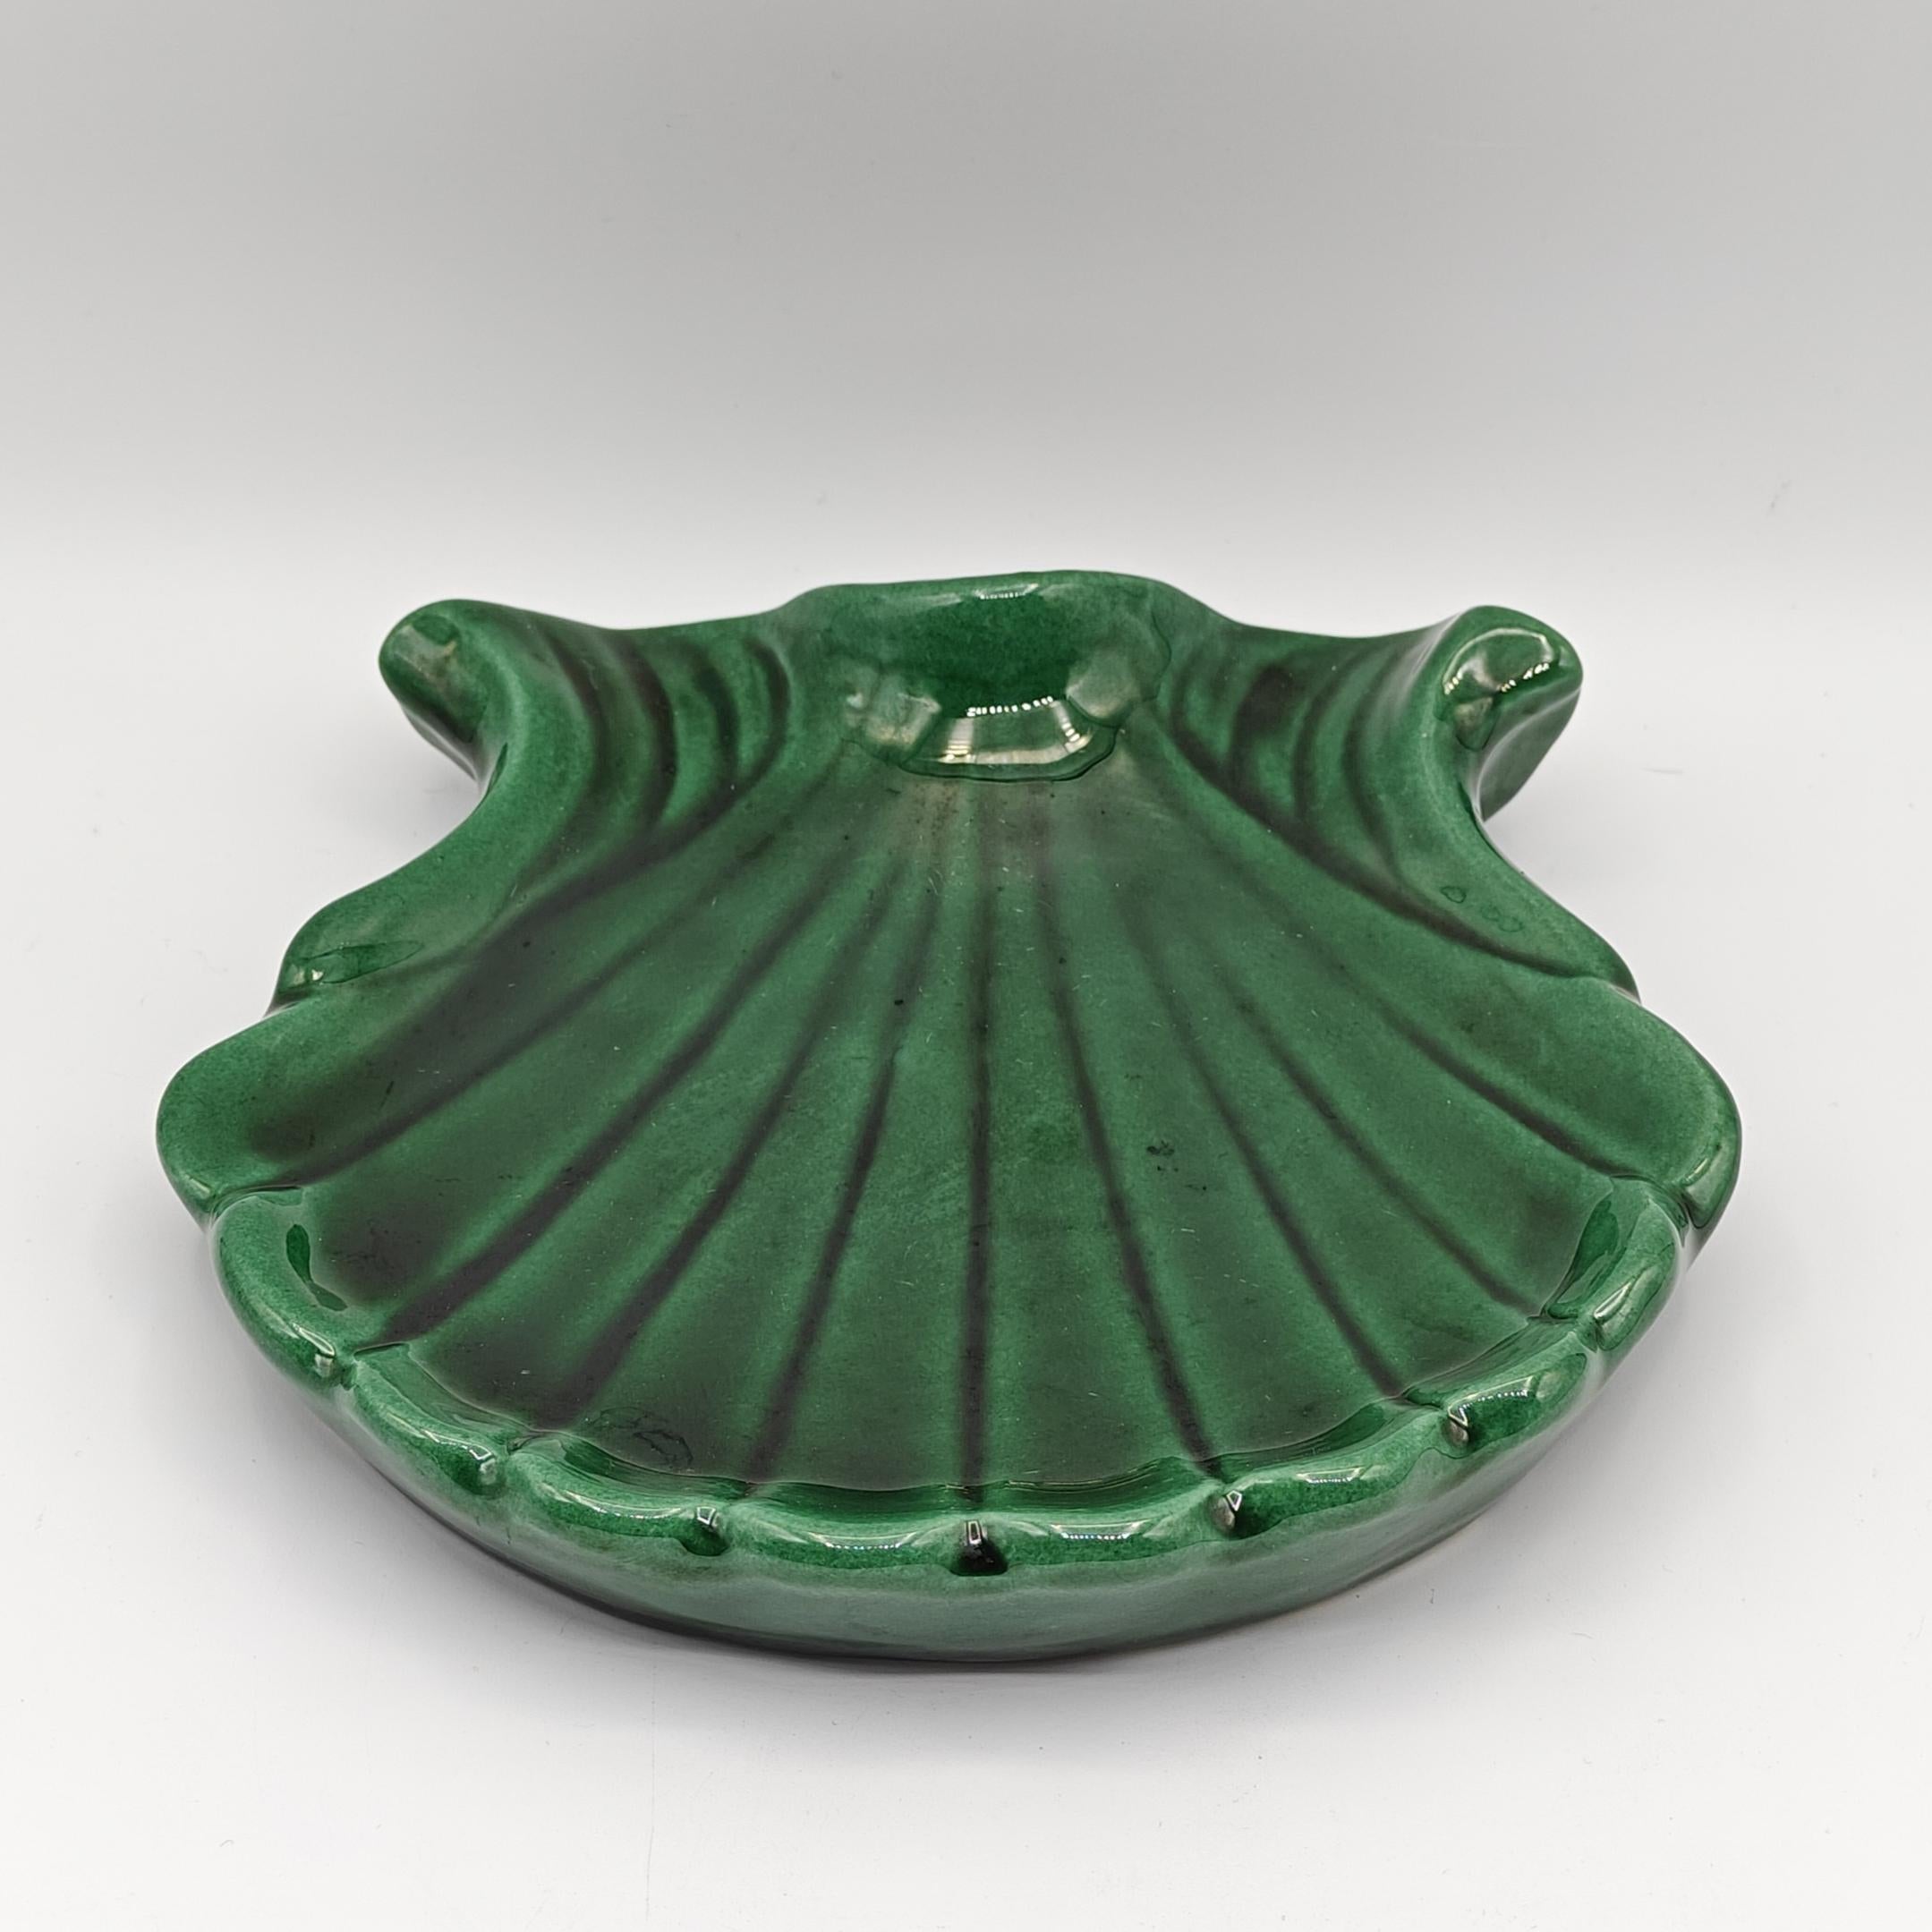 Beautiful glazed ceramic catch-all tray from the renowned Vallauris ceramist, Philippe Giuge, father of Marius Giuge (who was also a ceramist in Vallauris). This catch-all tray depicts a seashell, possibly a scallop shell, and is enamelled in a